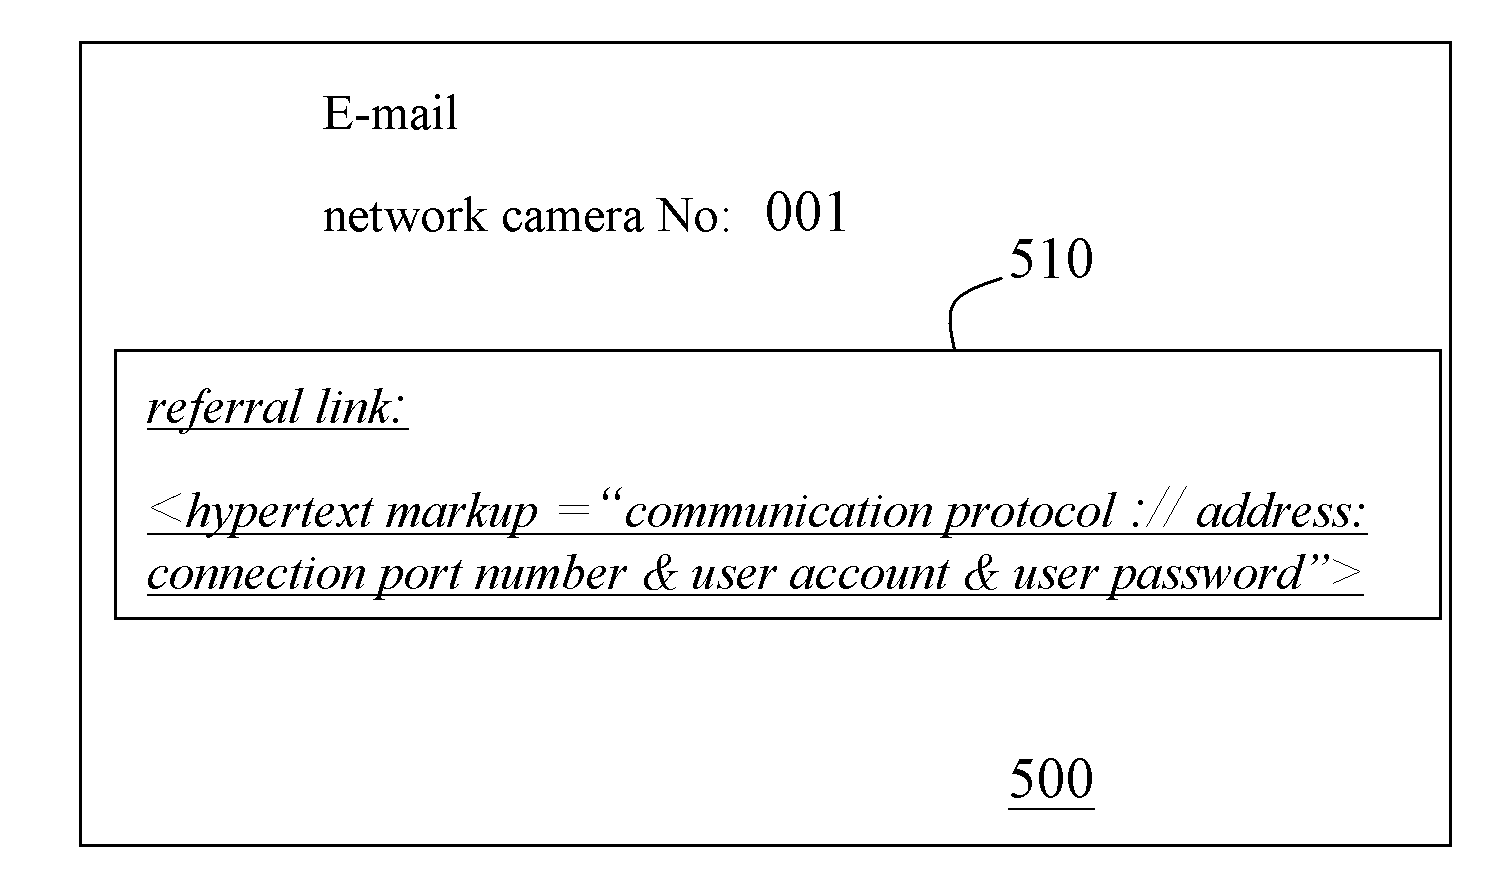 Remote monitoring control method of network camera